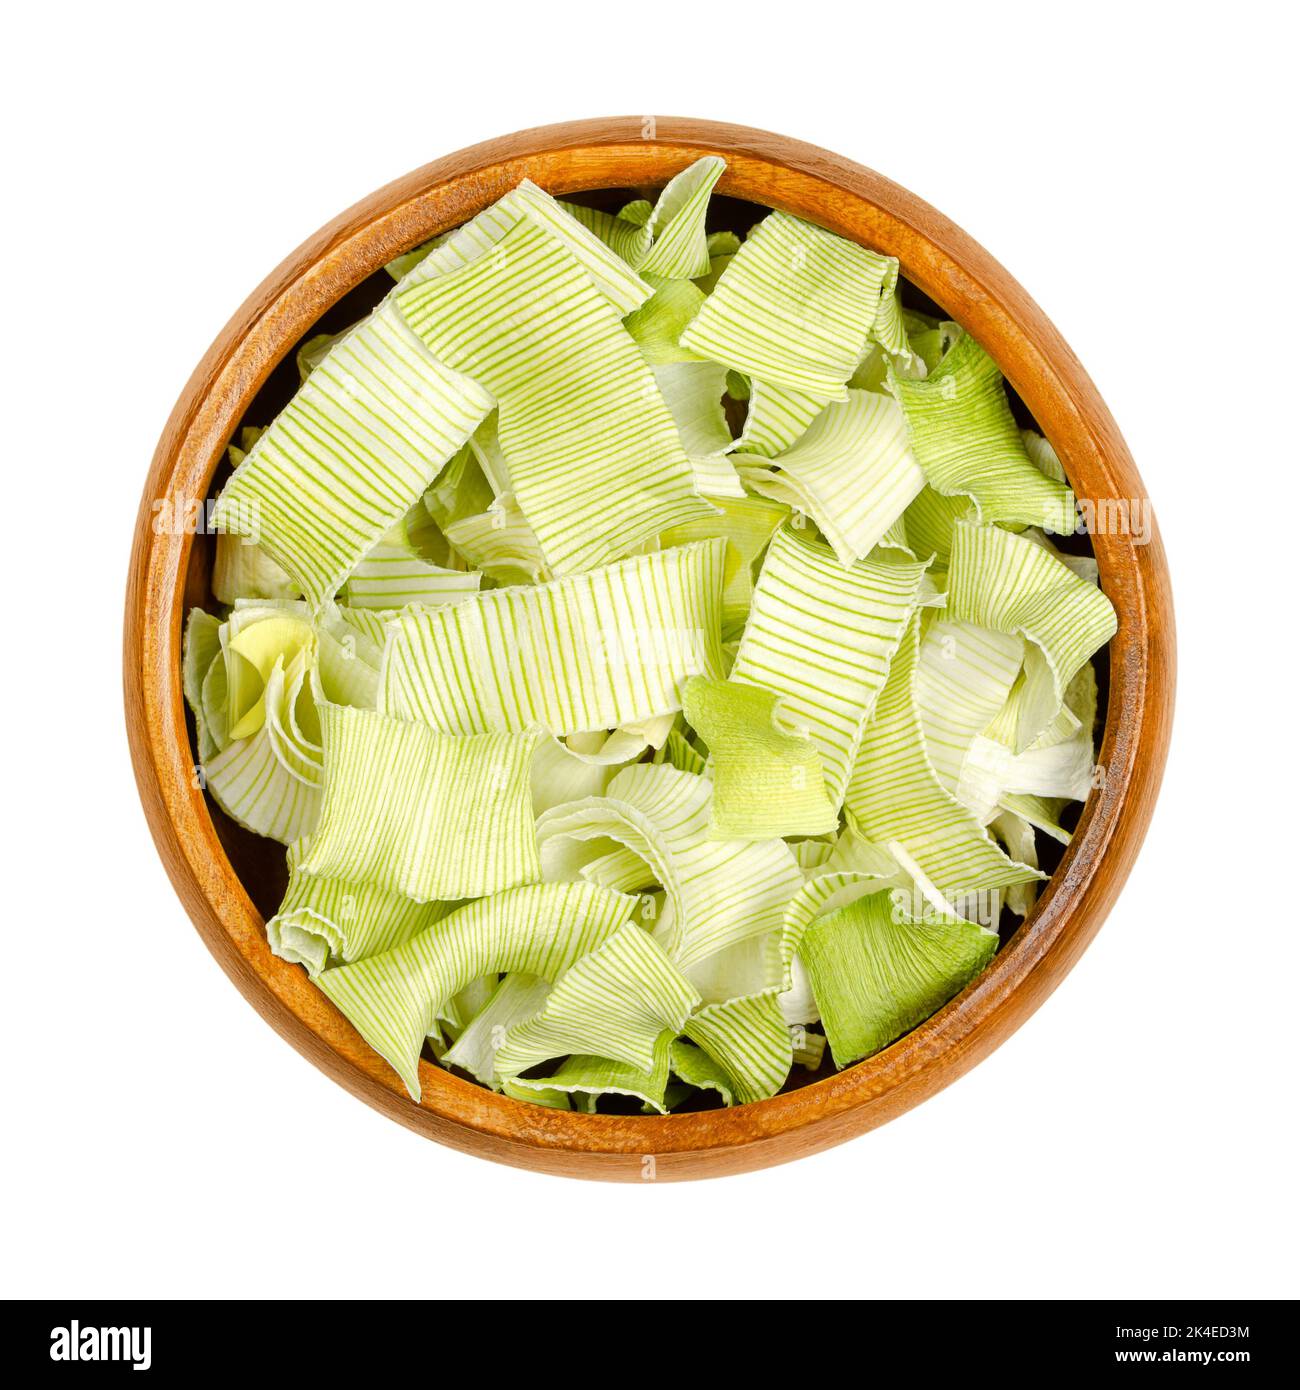 Dehydrated leek flakes, from above, in a wooden bowl. Dried strips of Allium porrum, a slightly green, crunchy and firm vegetable, with aromatic taste. Stock Photo